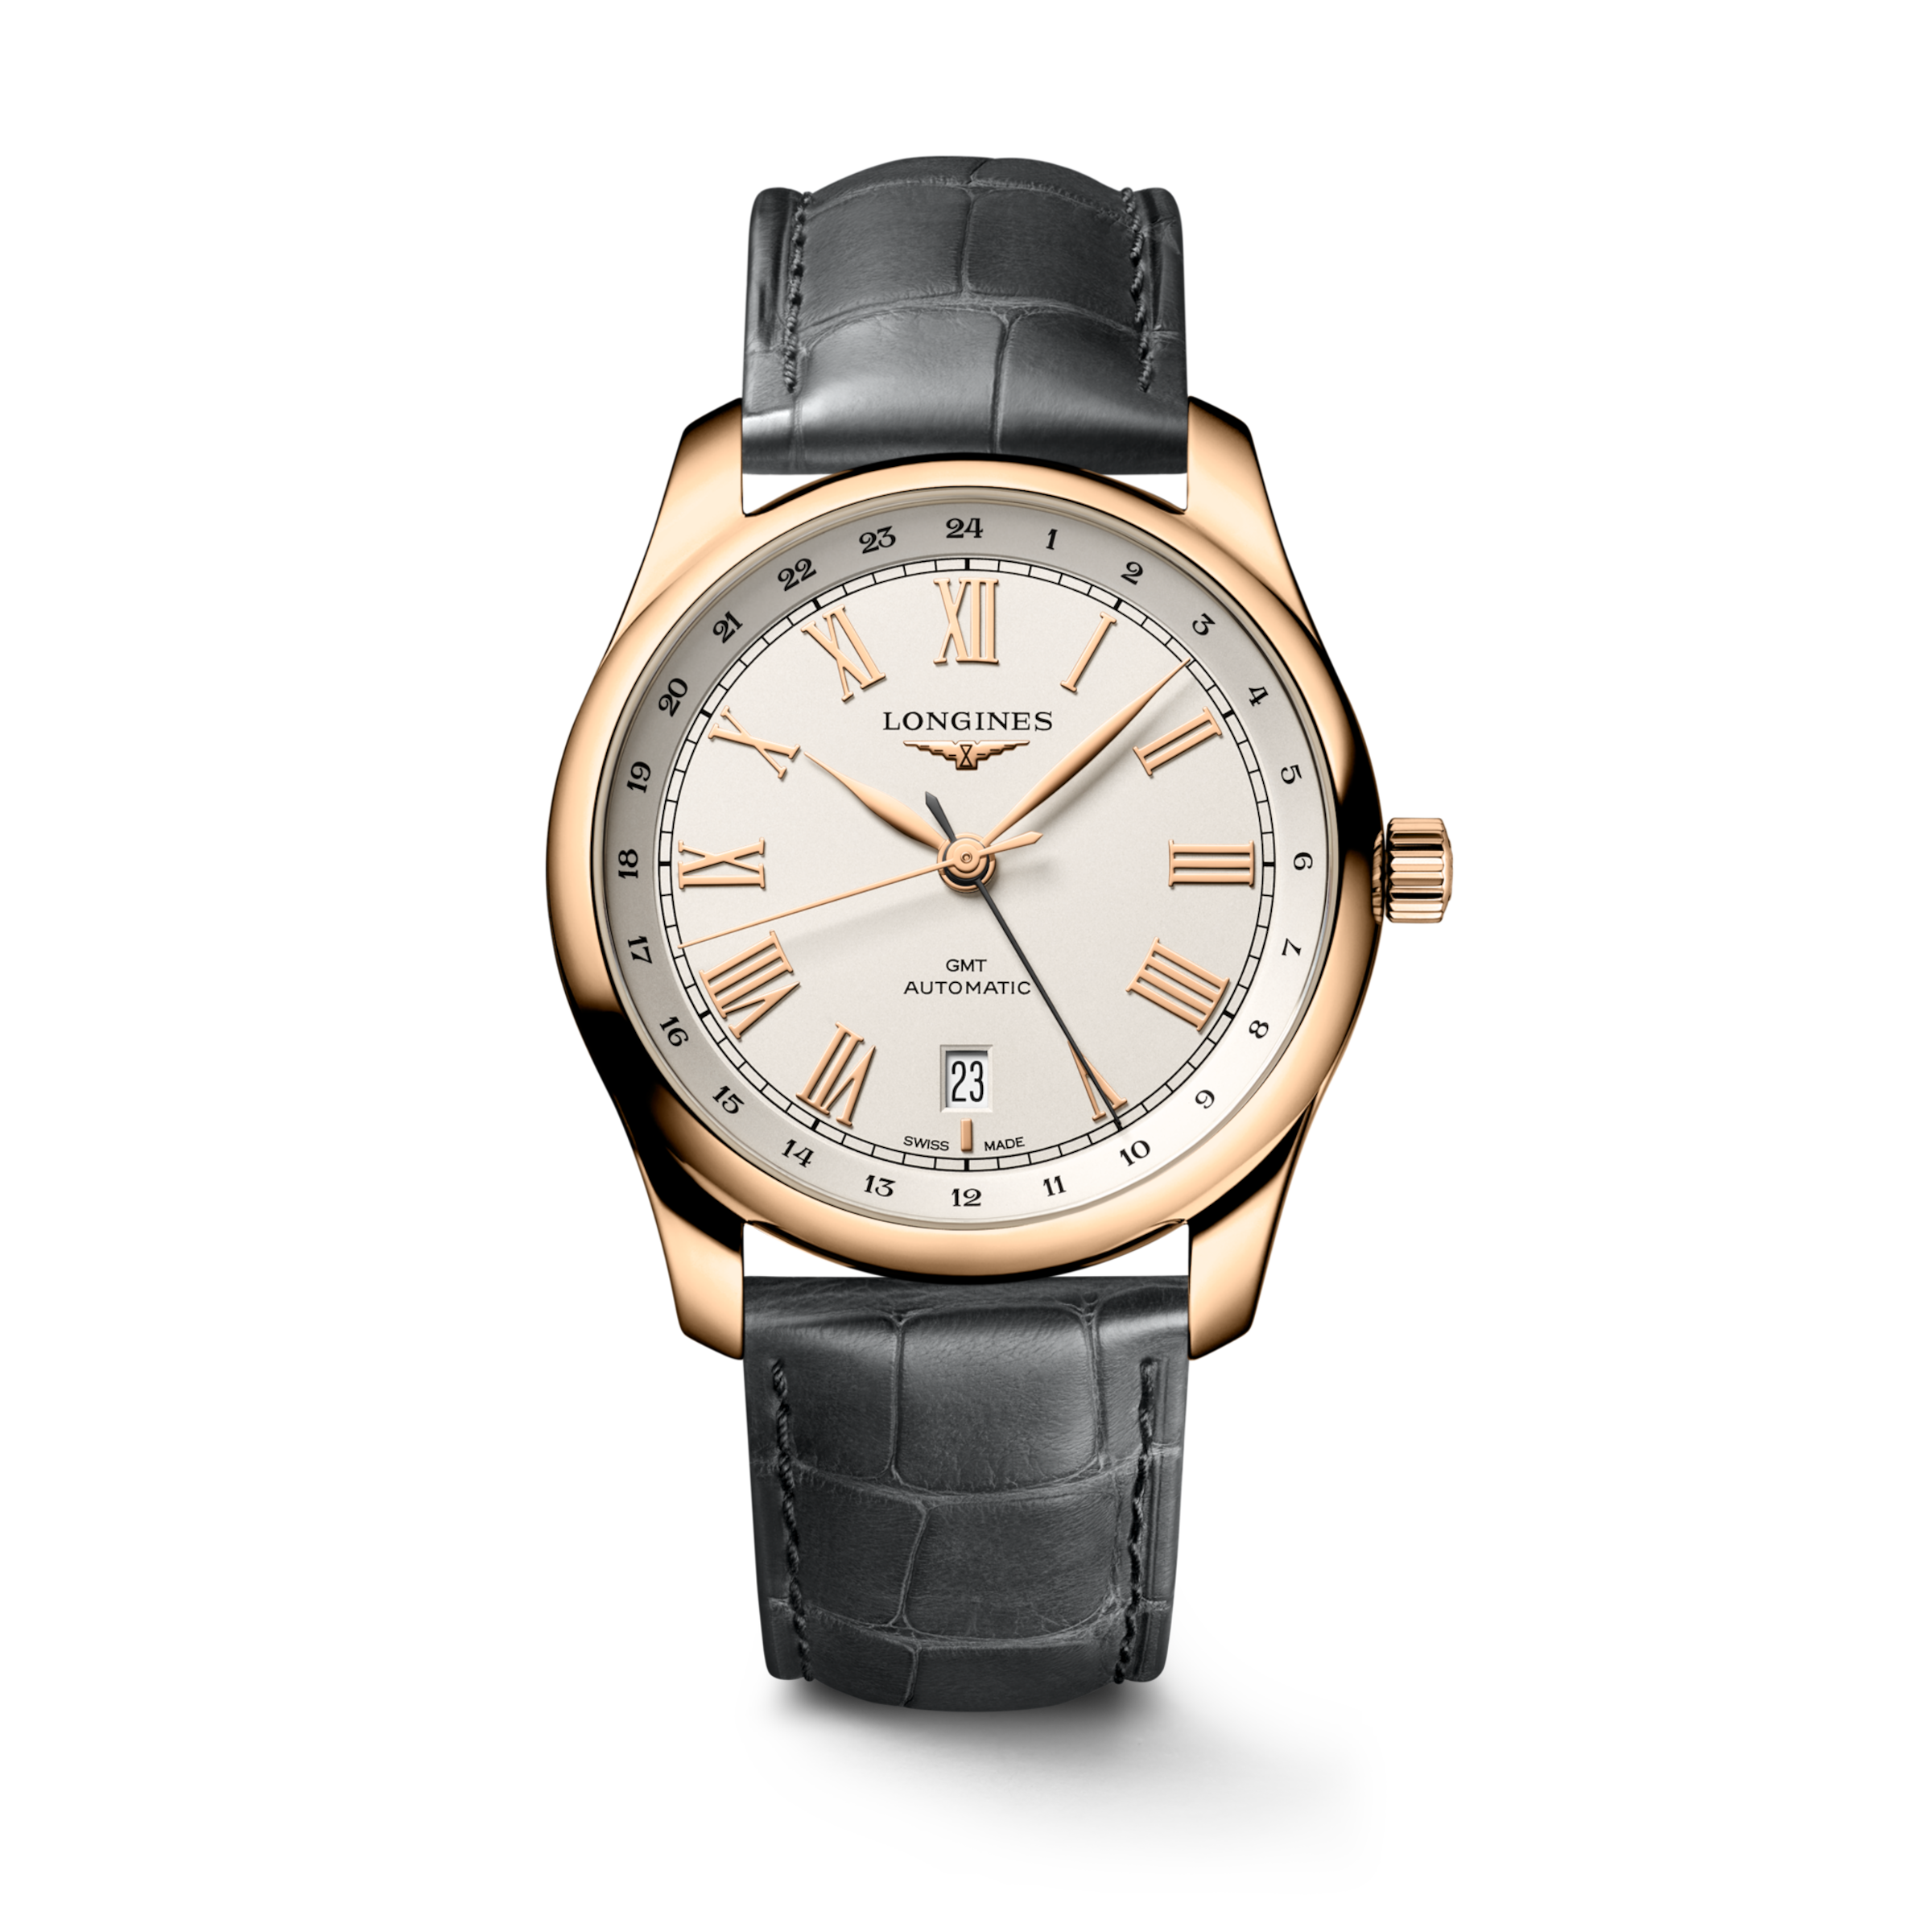 Longines MASTER COLLECTION Automatic 18 karat pink gold Watch - L2.844.8.71.2